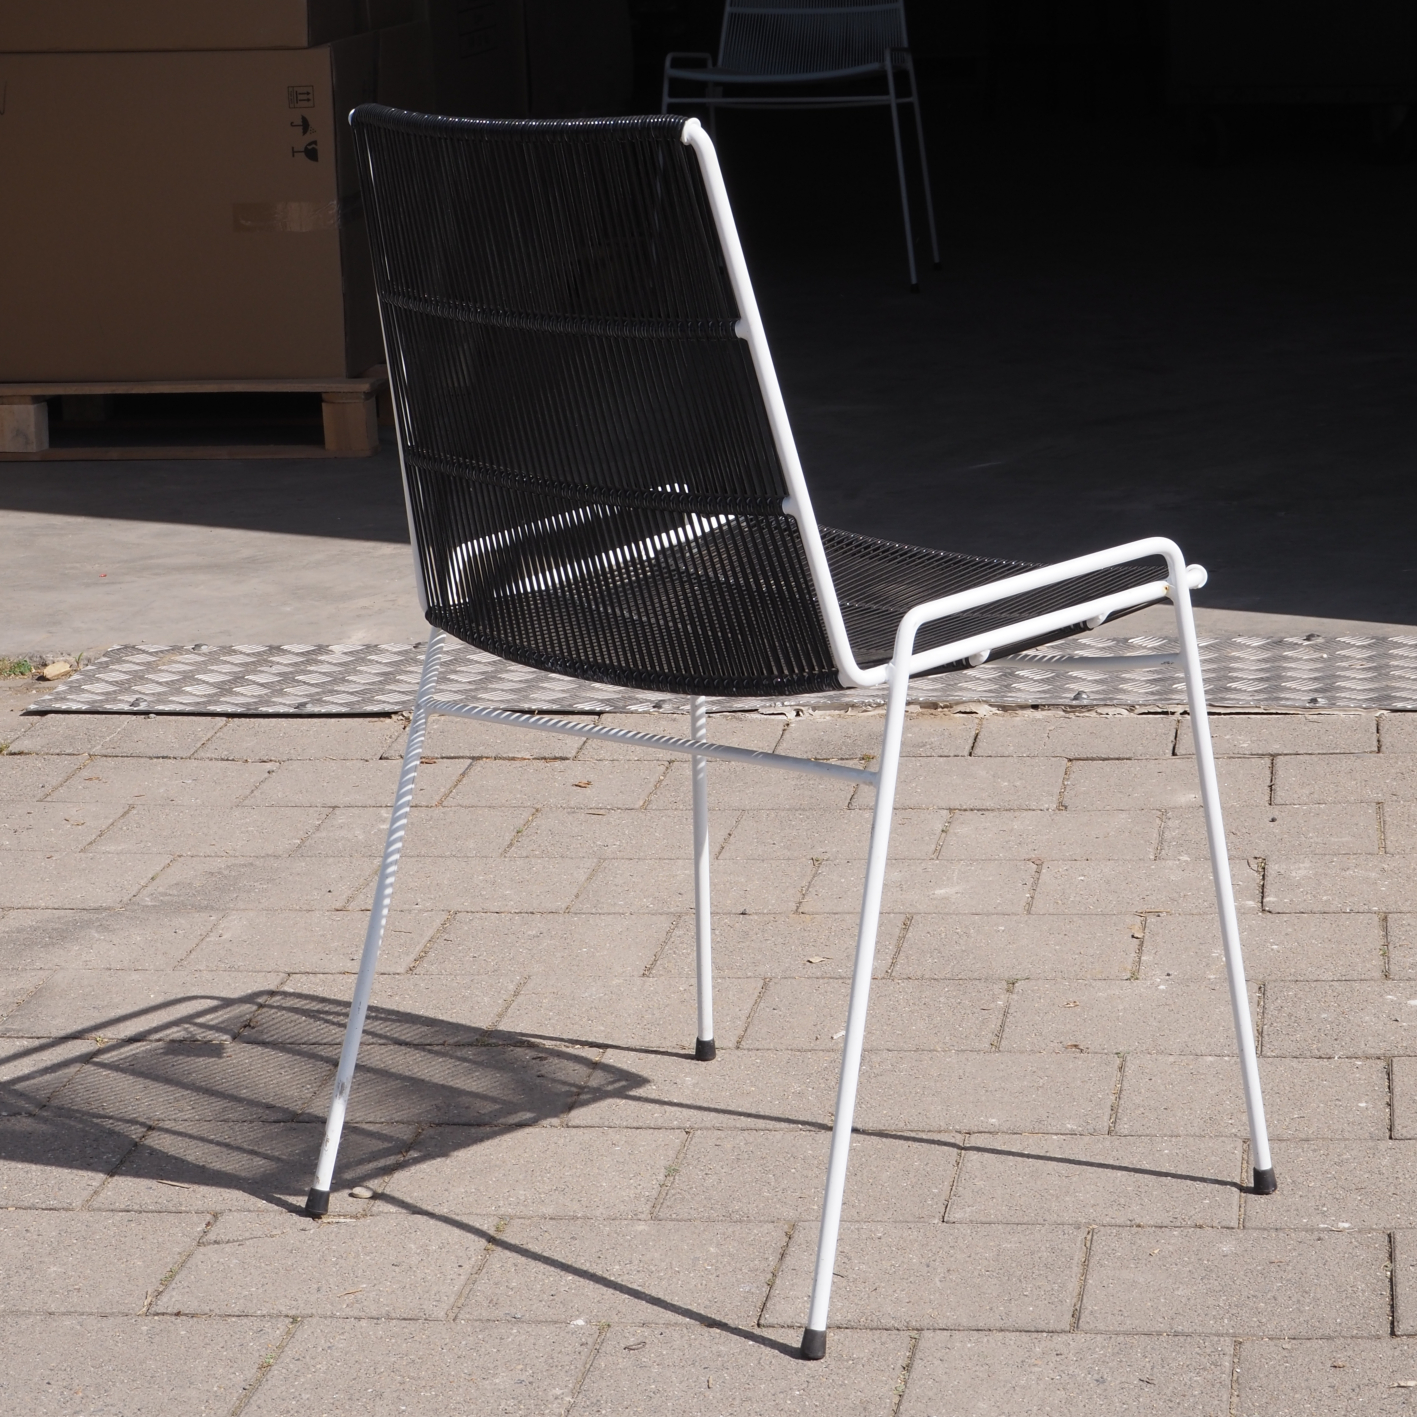 Exterior chair 'Abaco' by Paola Navone for Serax - White/Black